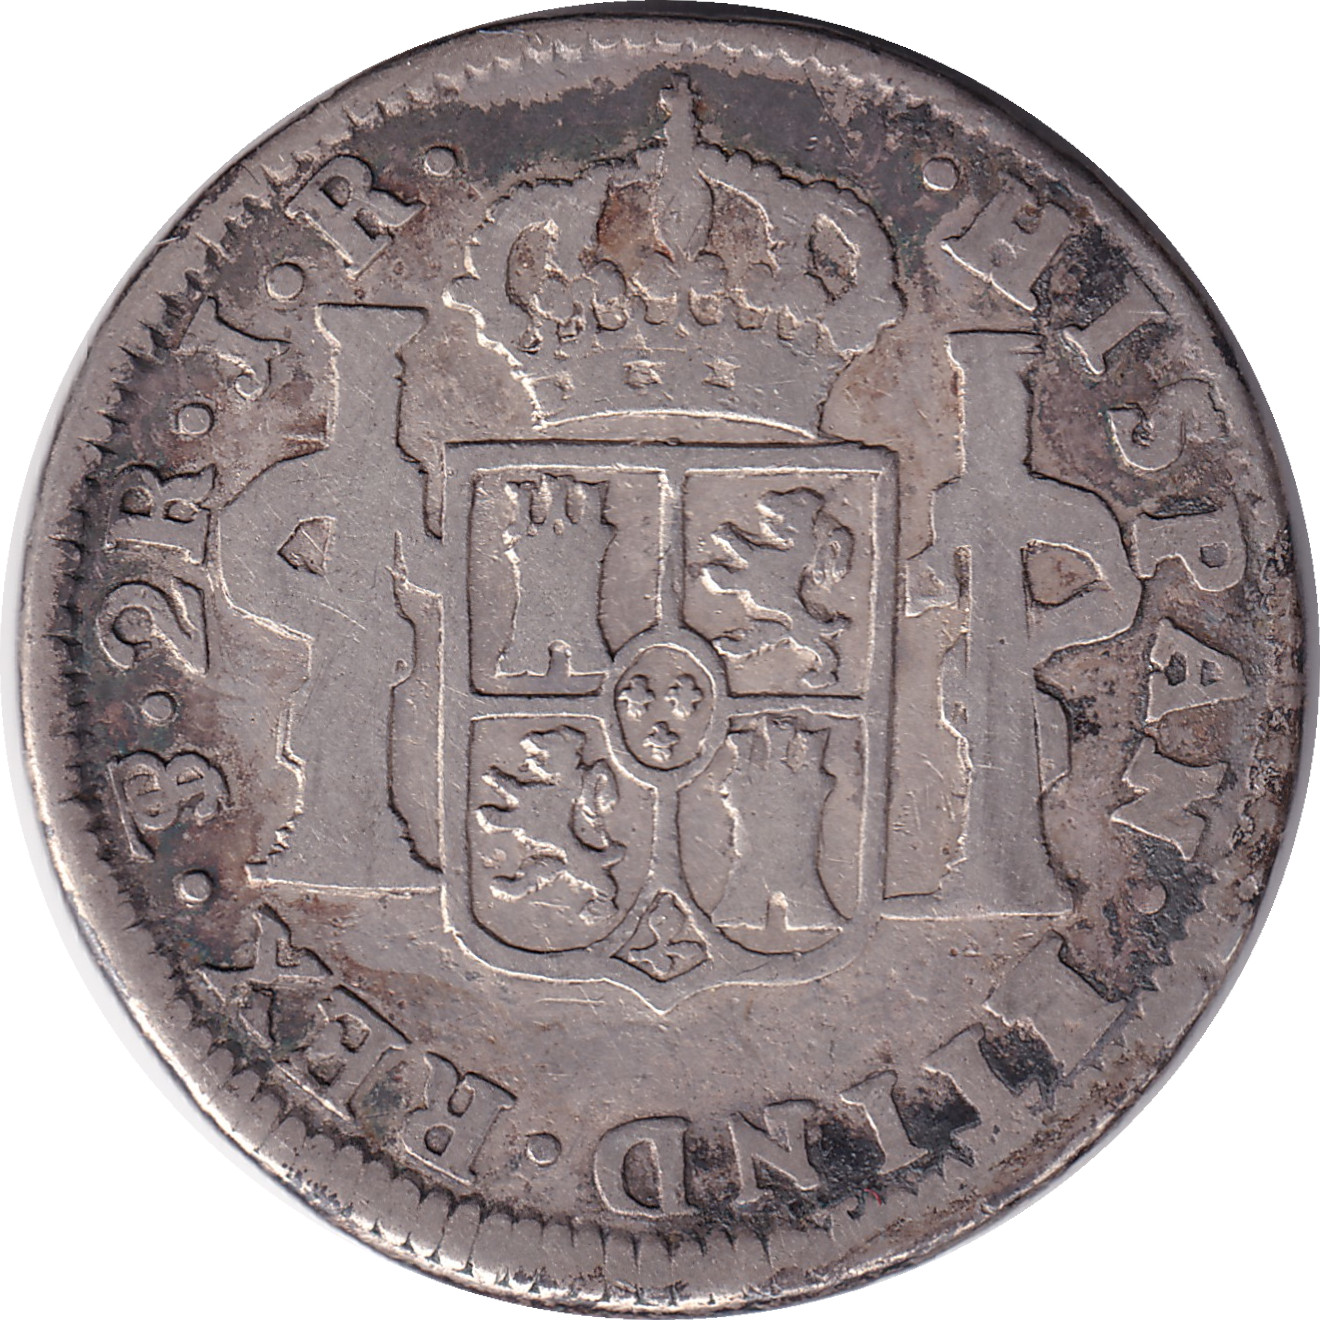 2 reales - Charles III - Young bust